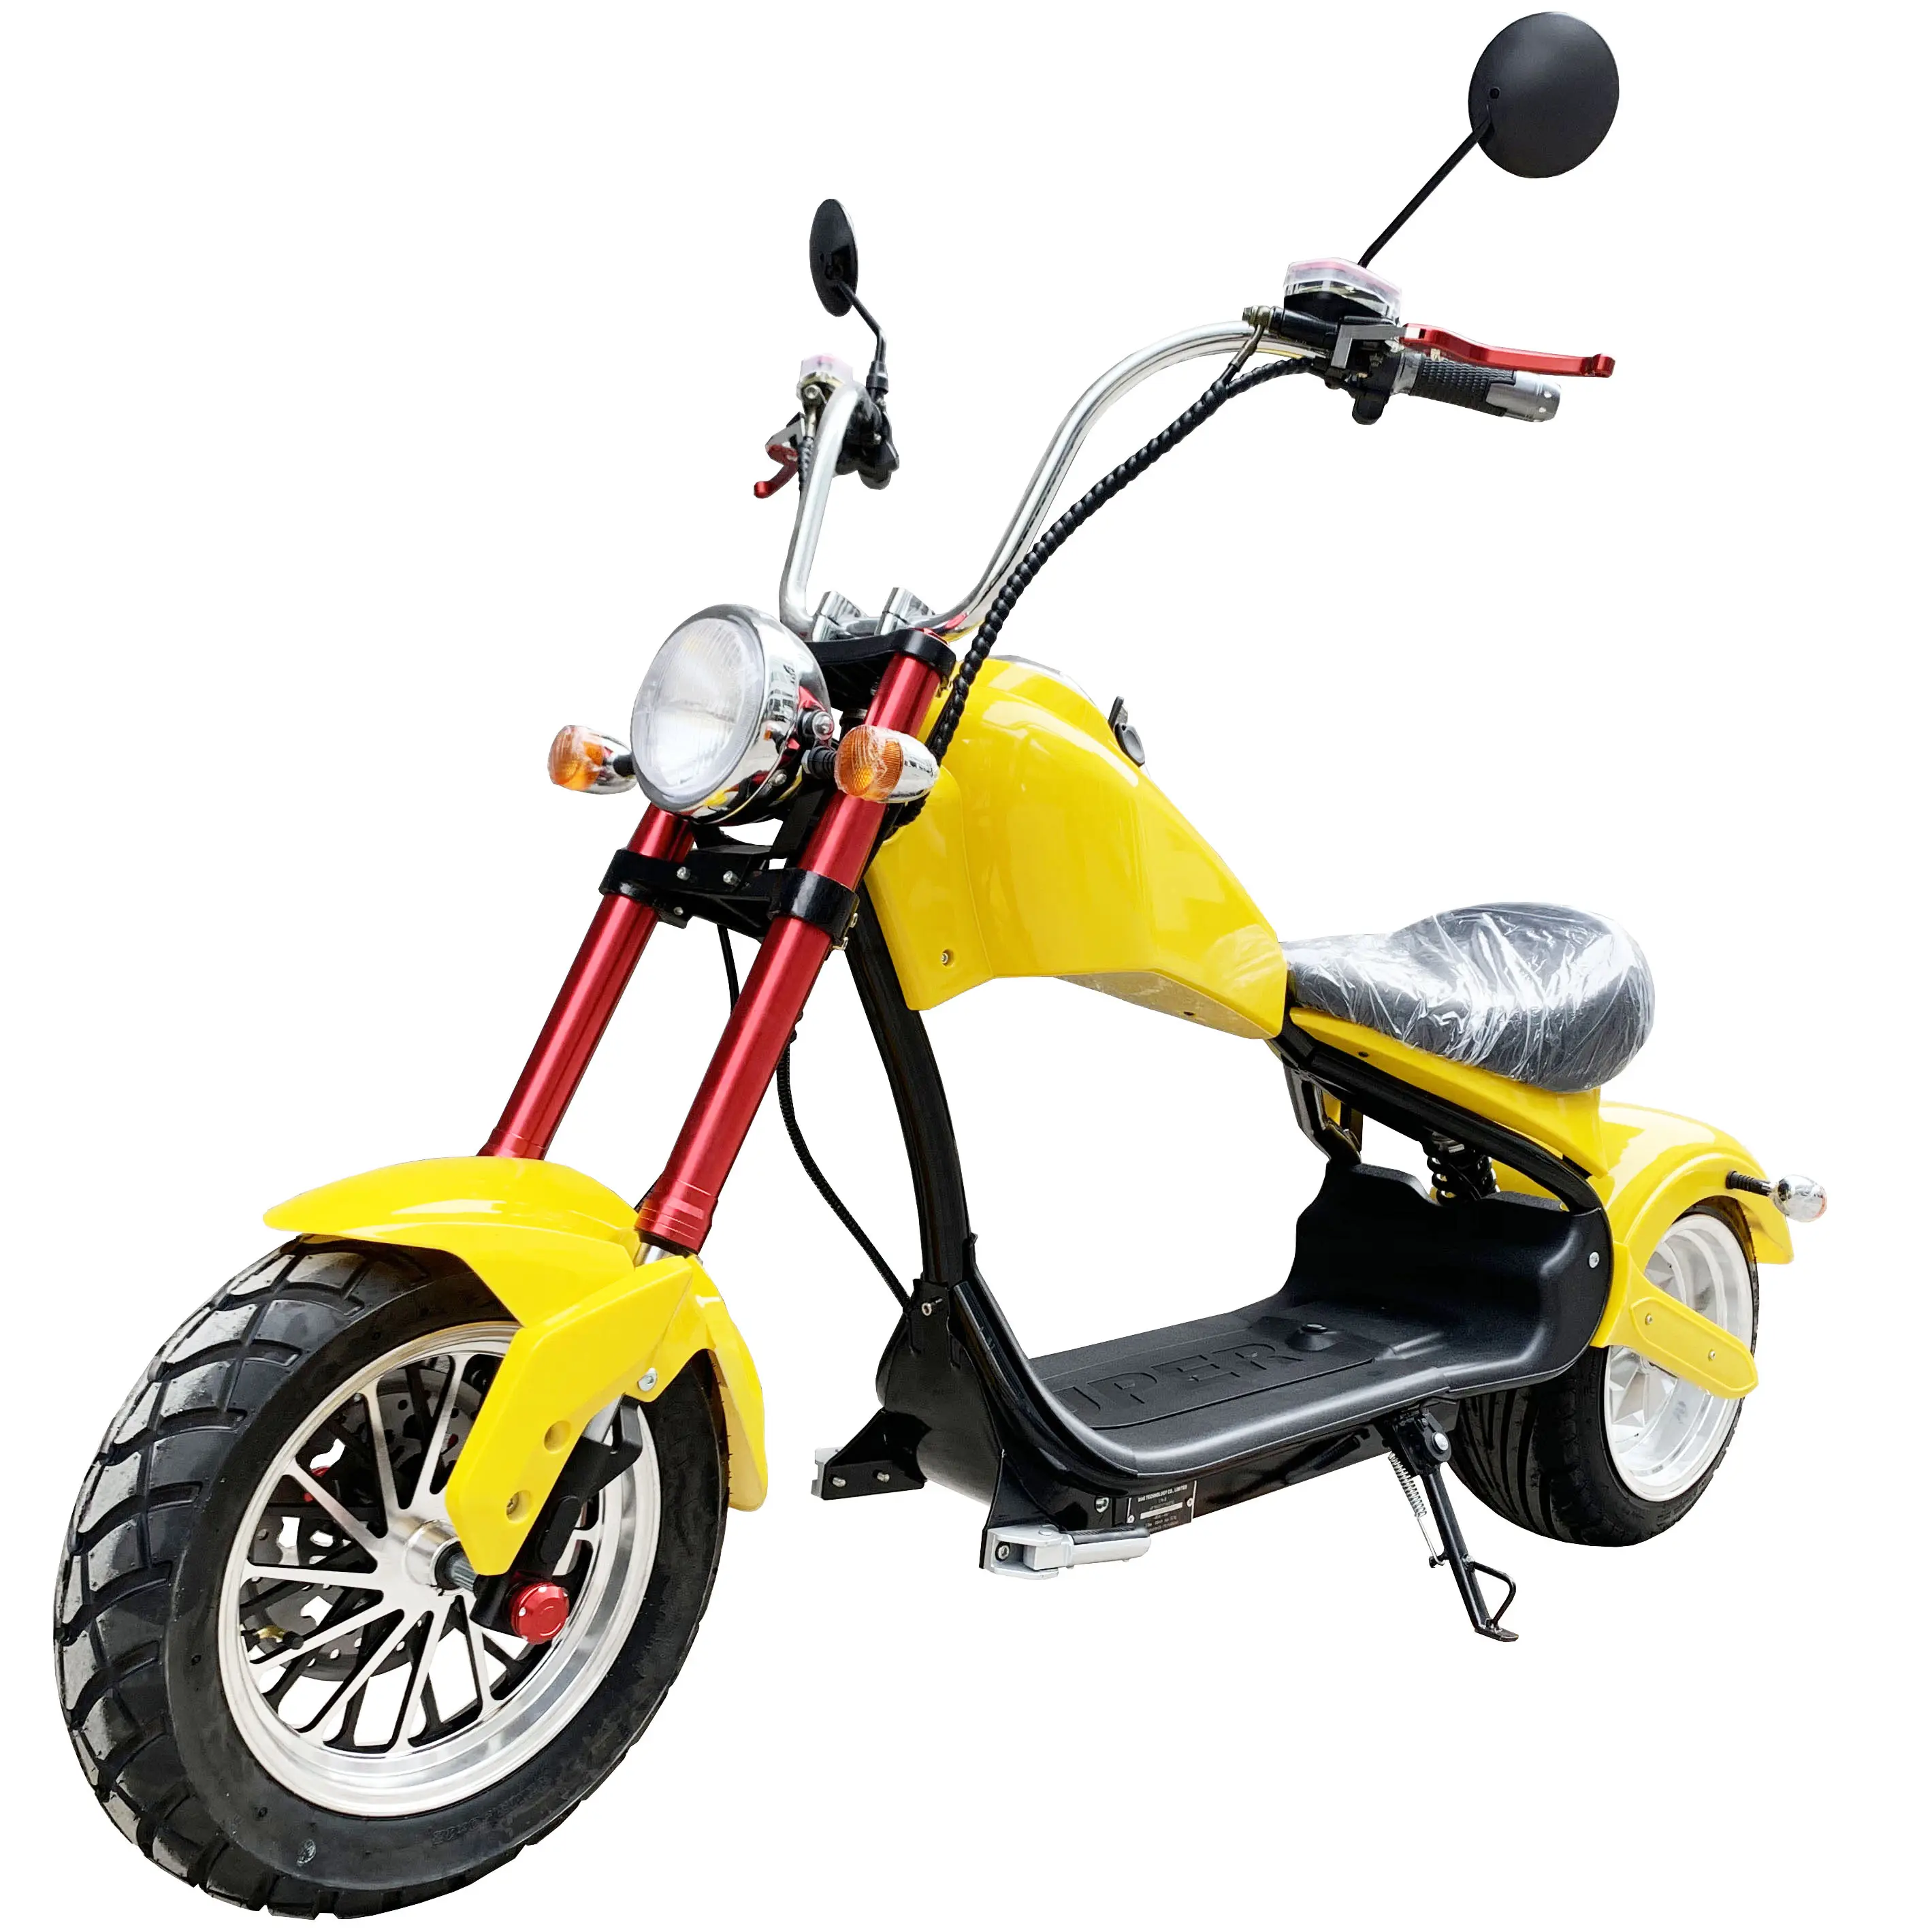 newest model wide tire with EEC certificate popular in EU legal in the street two wheels electric scooter